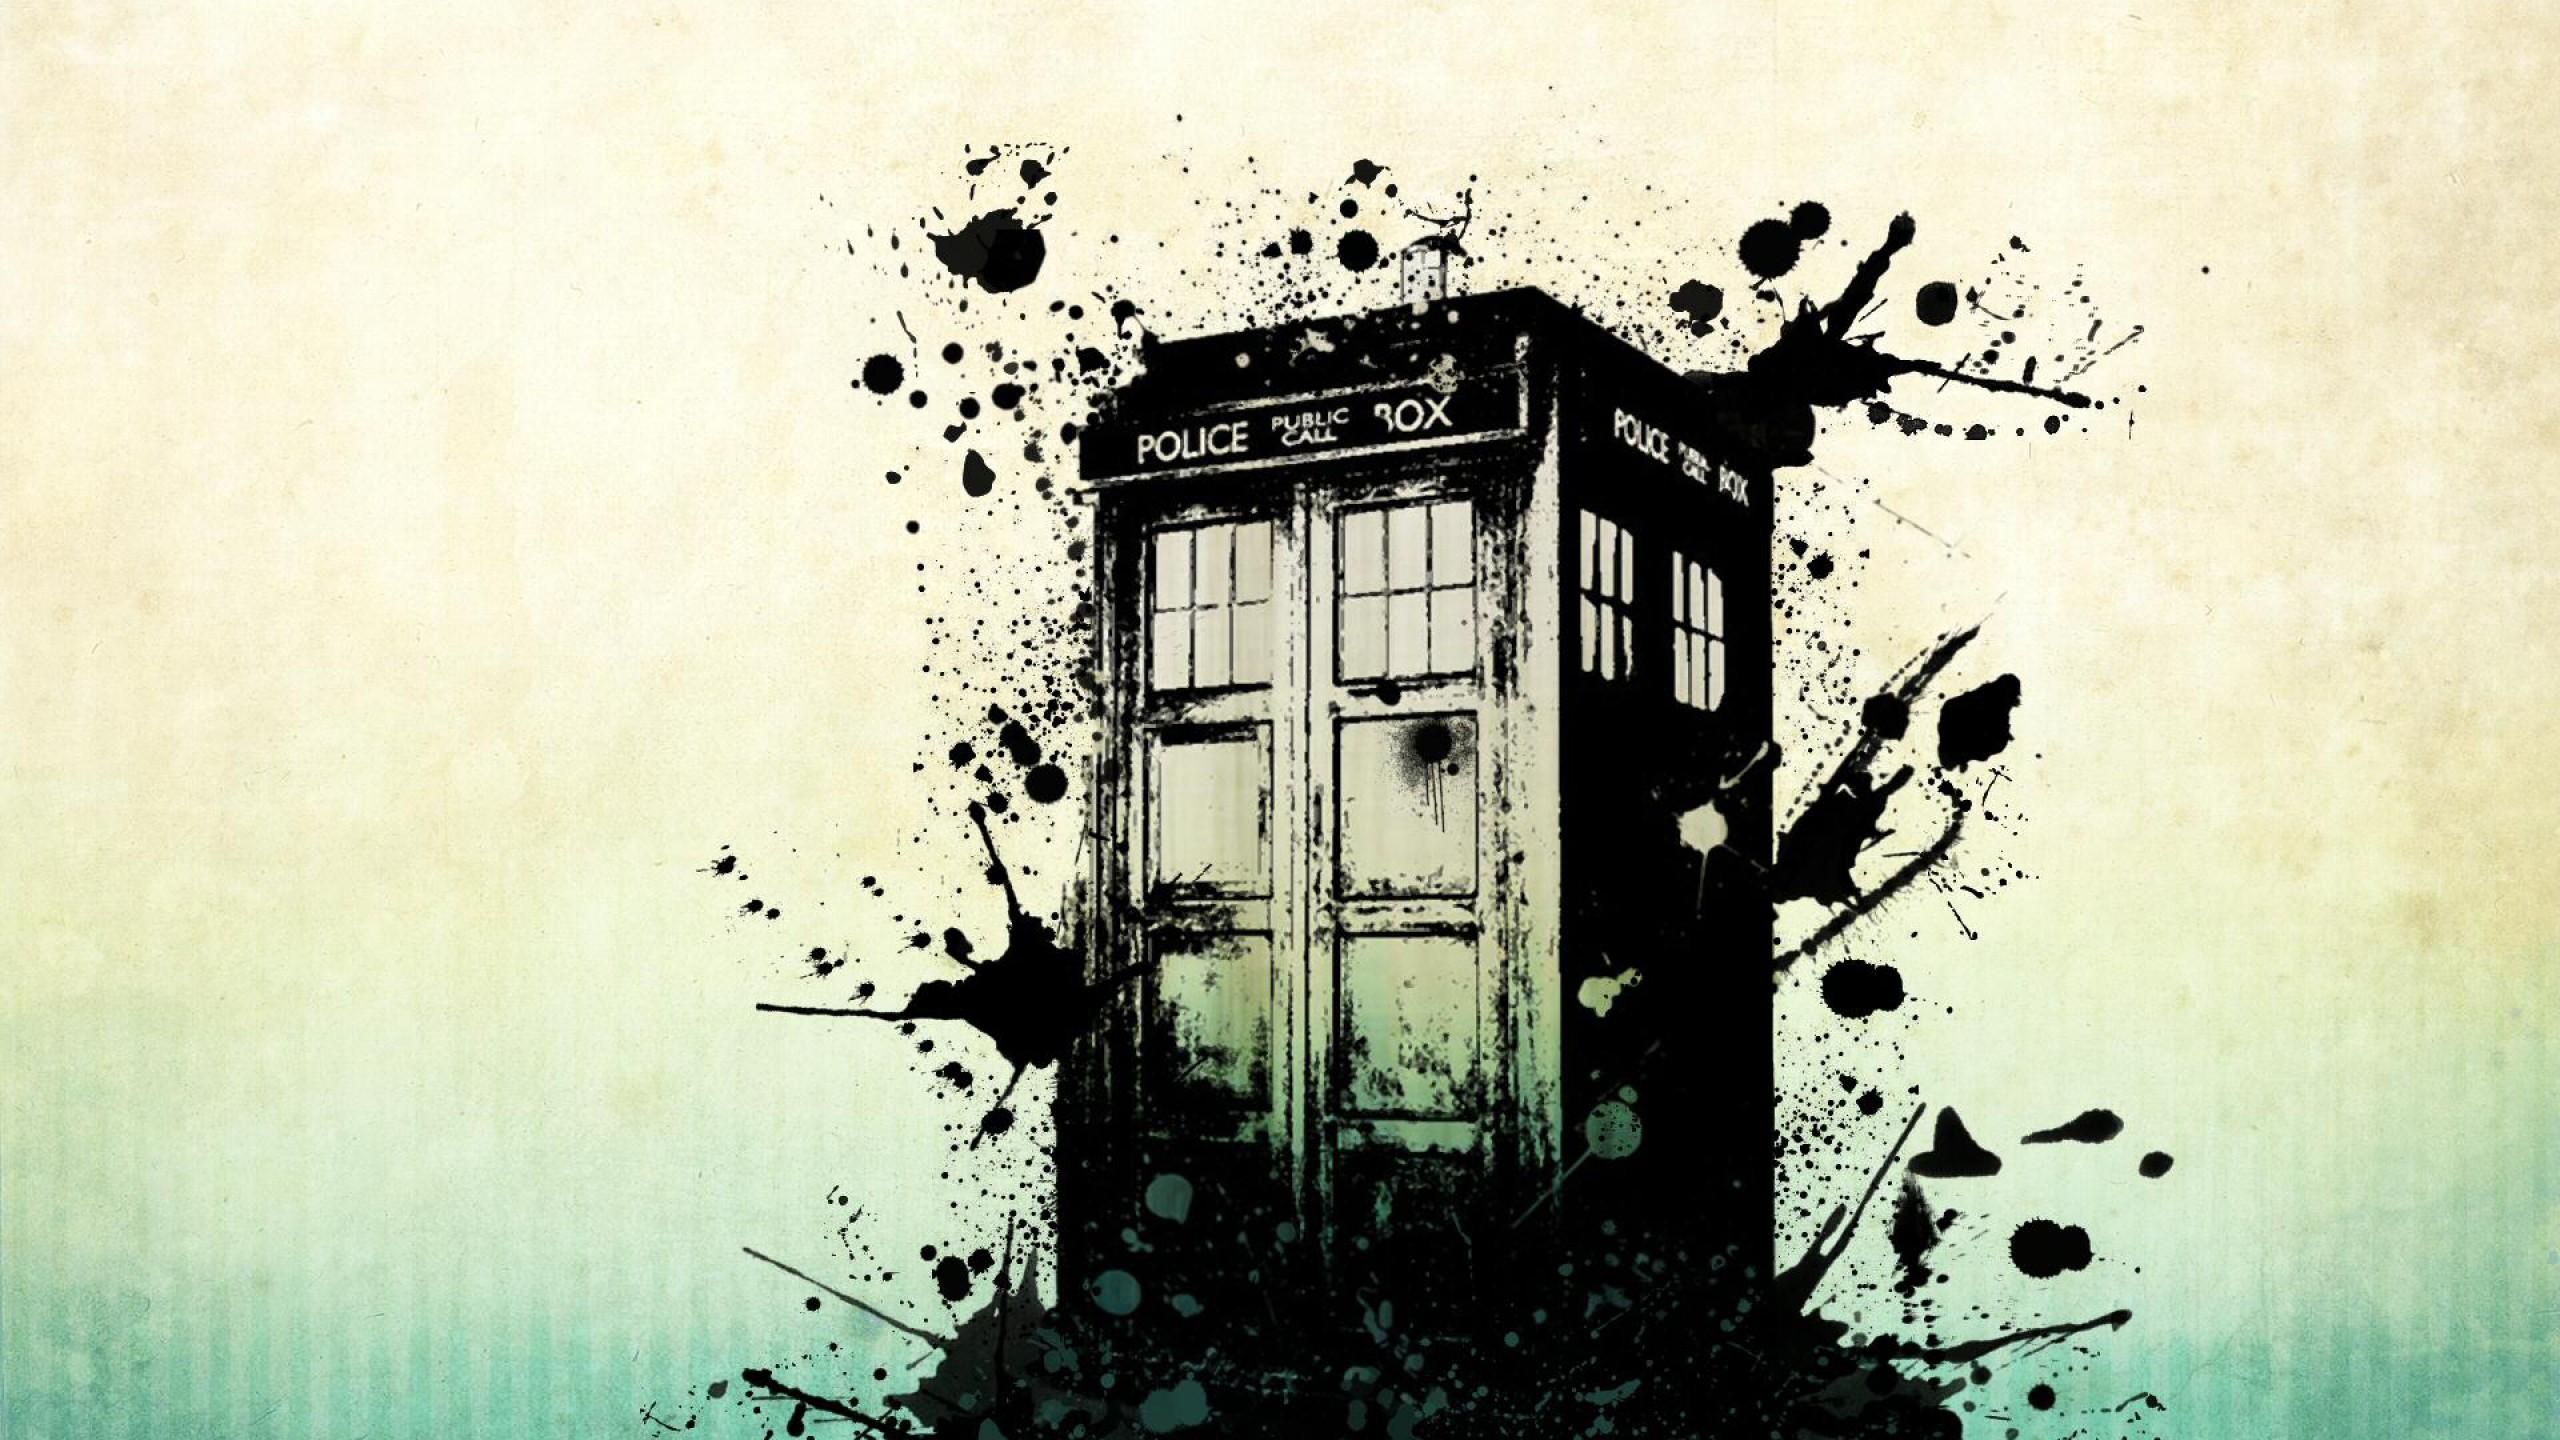 760+ Doctor Who HD Wallpapers and Backgrounds